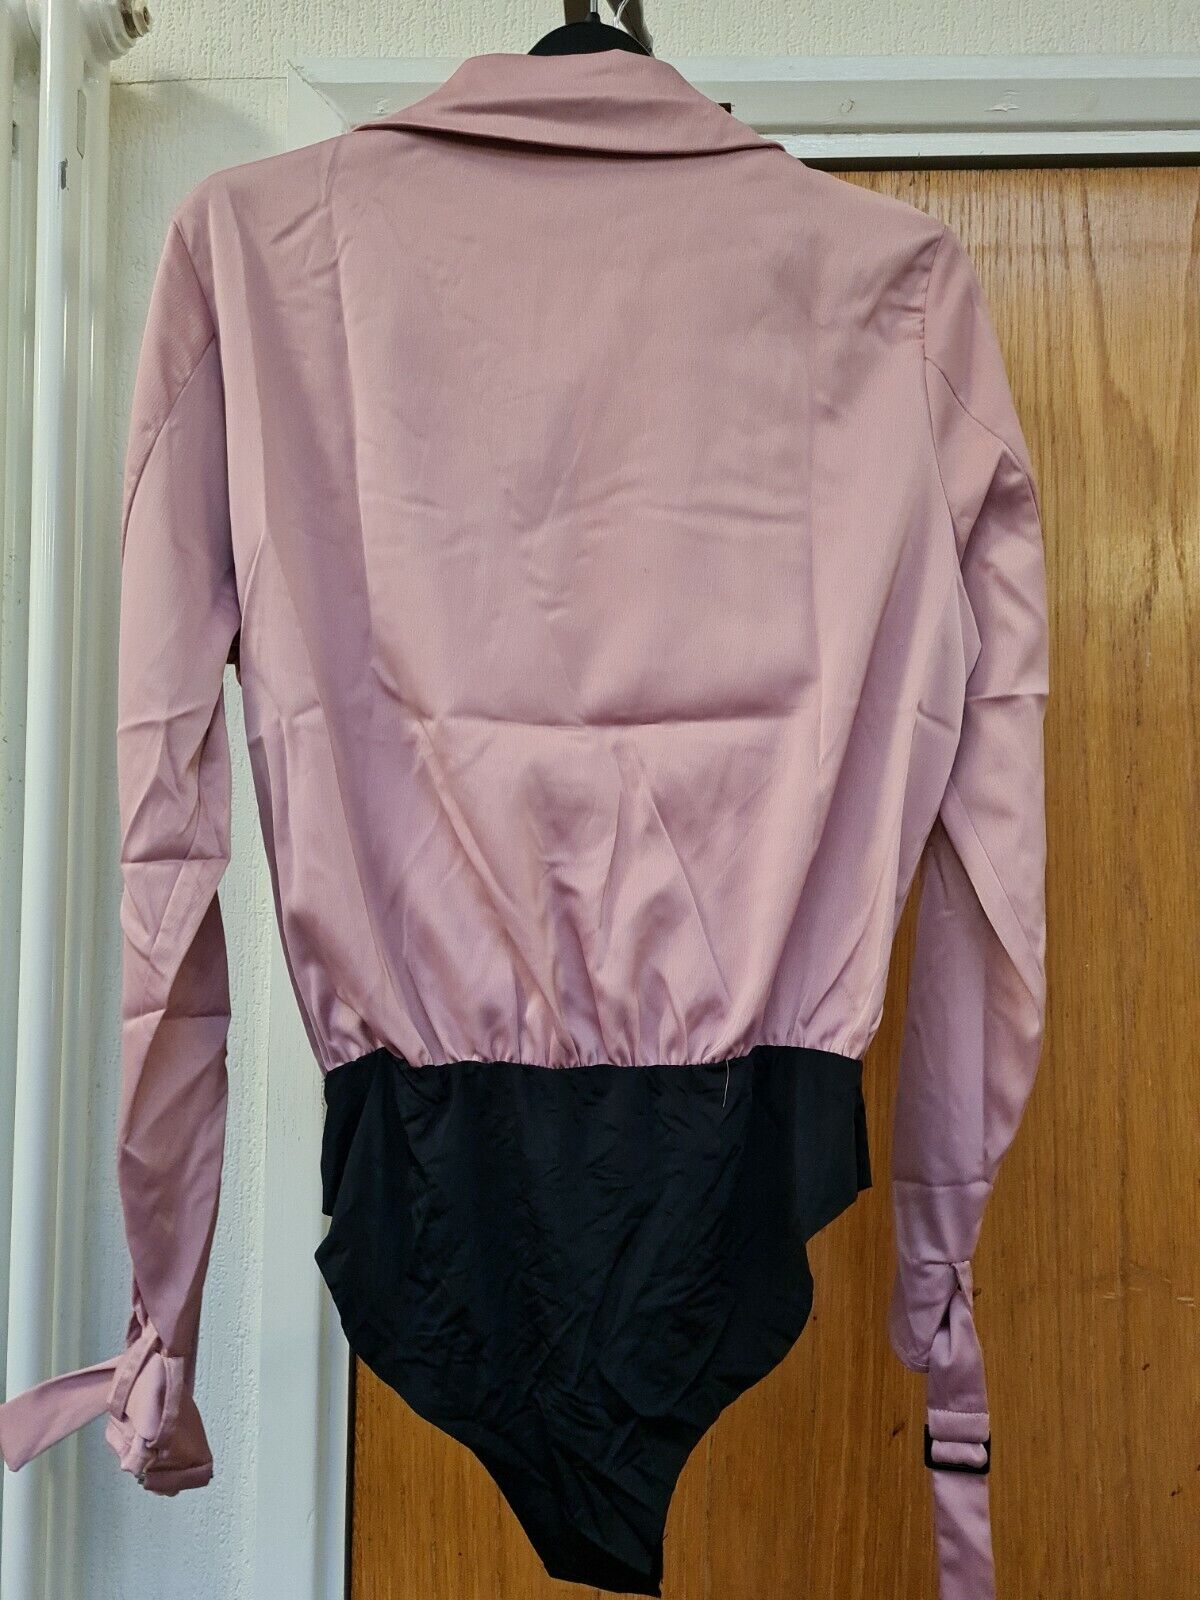 4th reckless Satin Wrap Front Pocket Detail Body In Blush Ref Dc6